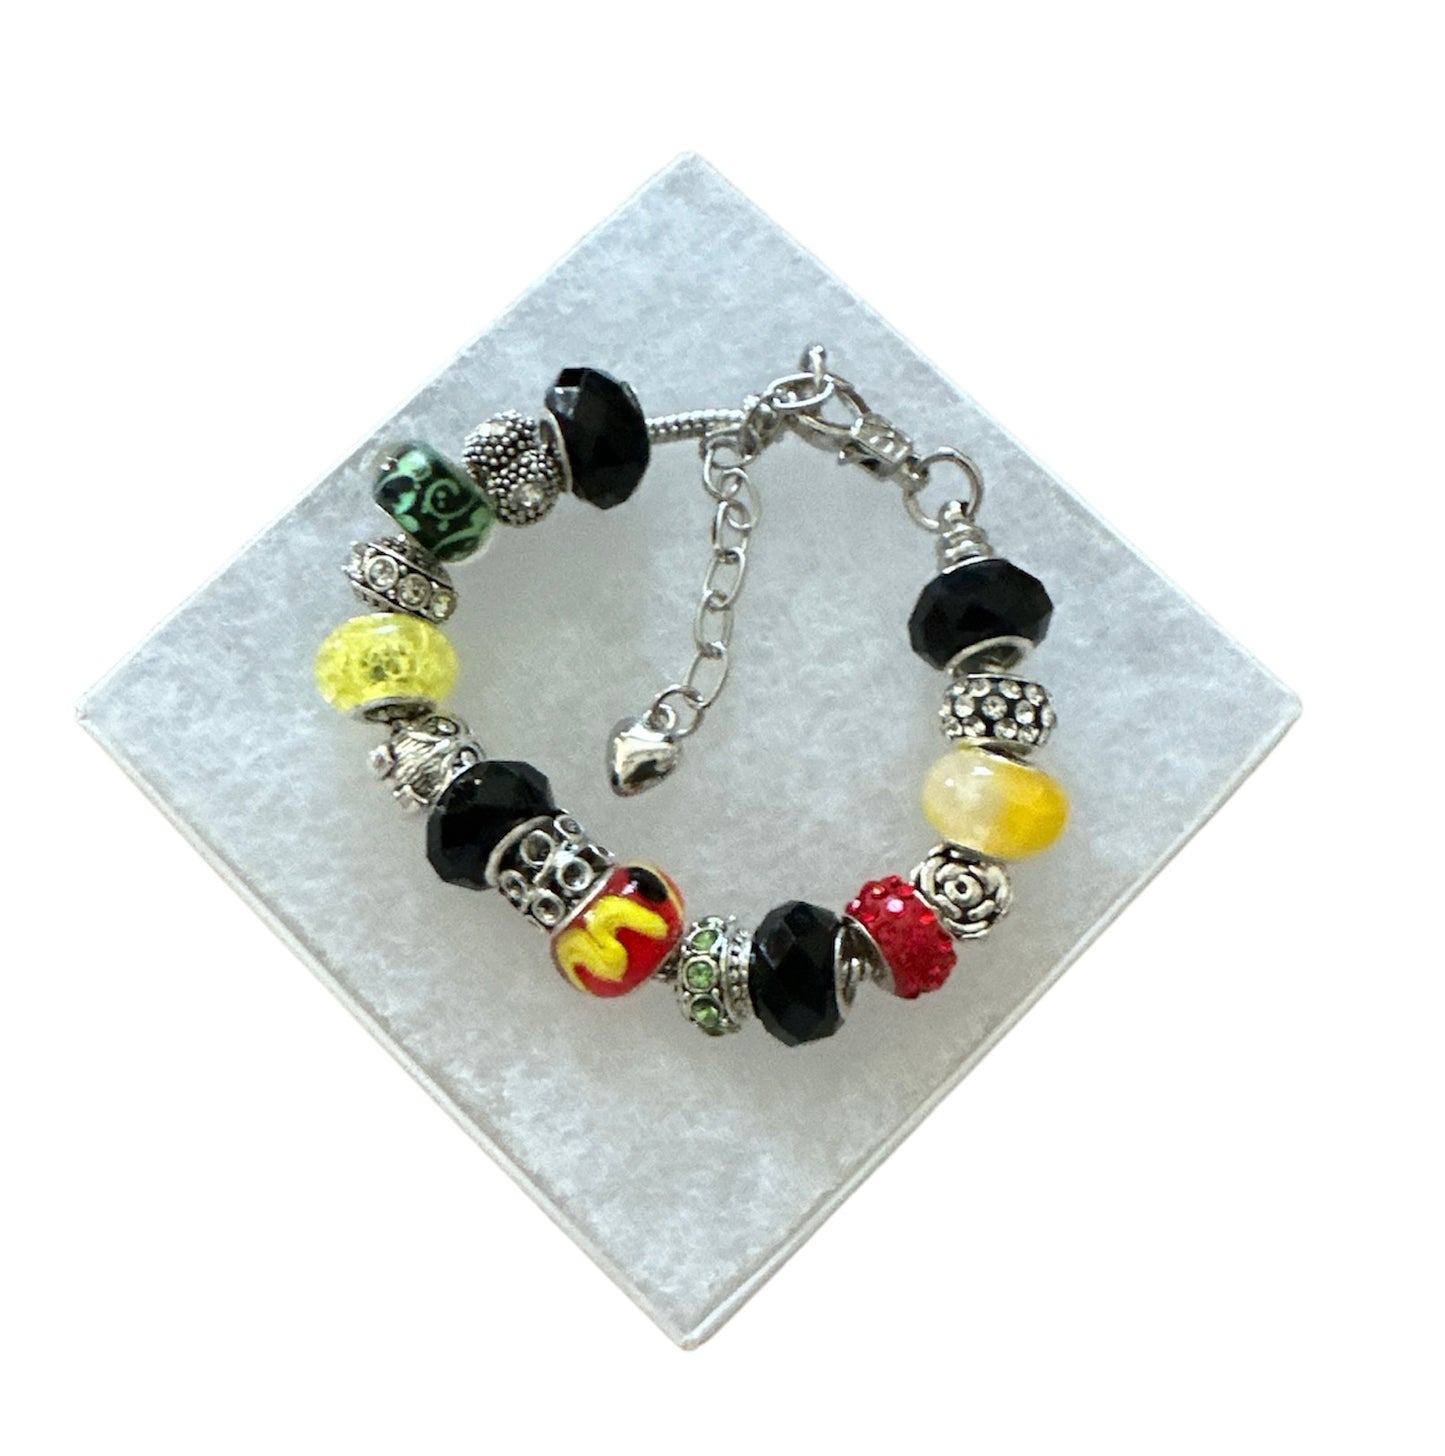 Creation Essential's Luxury Queen Sister Charm Bracelet- African/Black History Inspired Charm  Bracelets